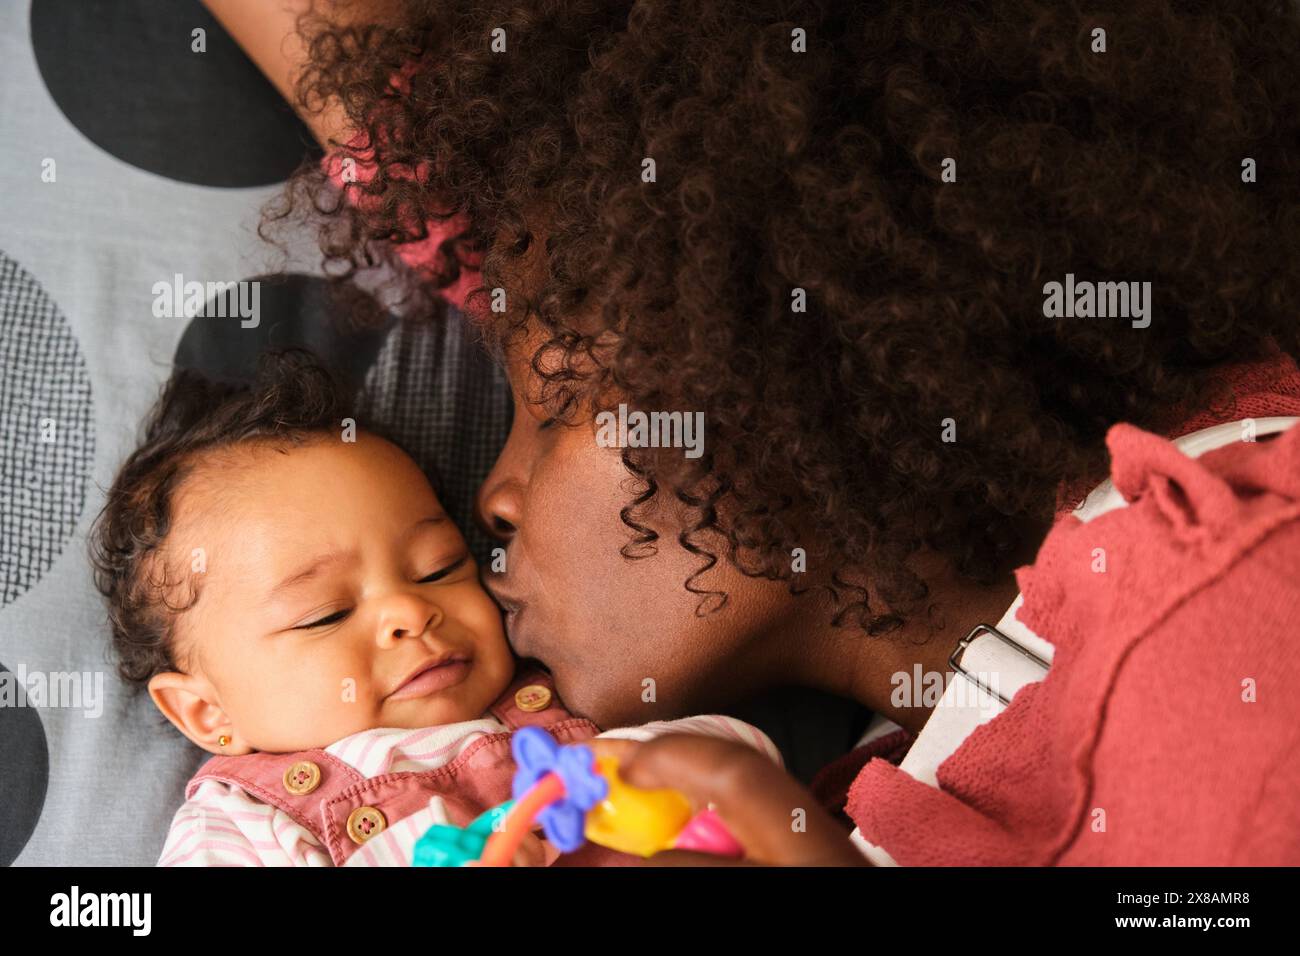 African woman is kissing a baby girl laying in bed. Stock Photo